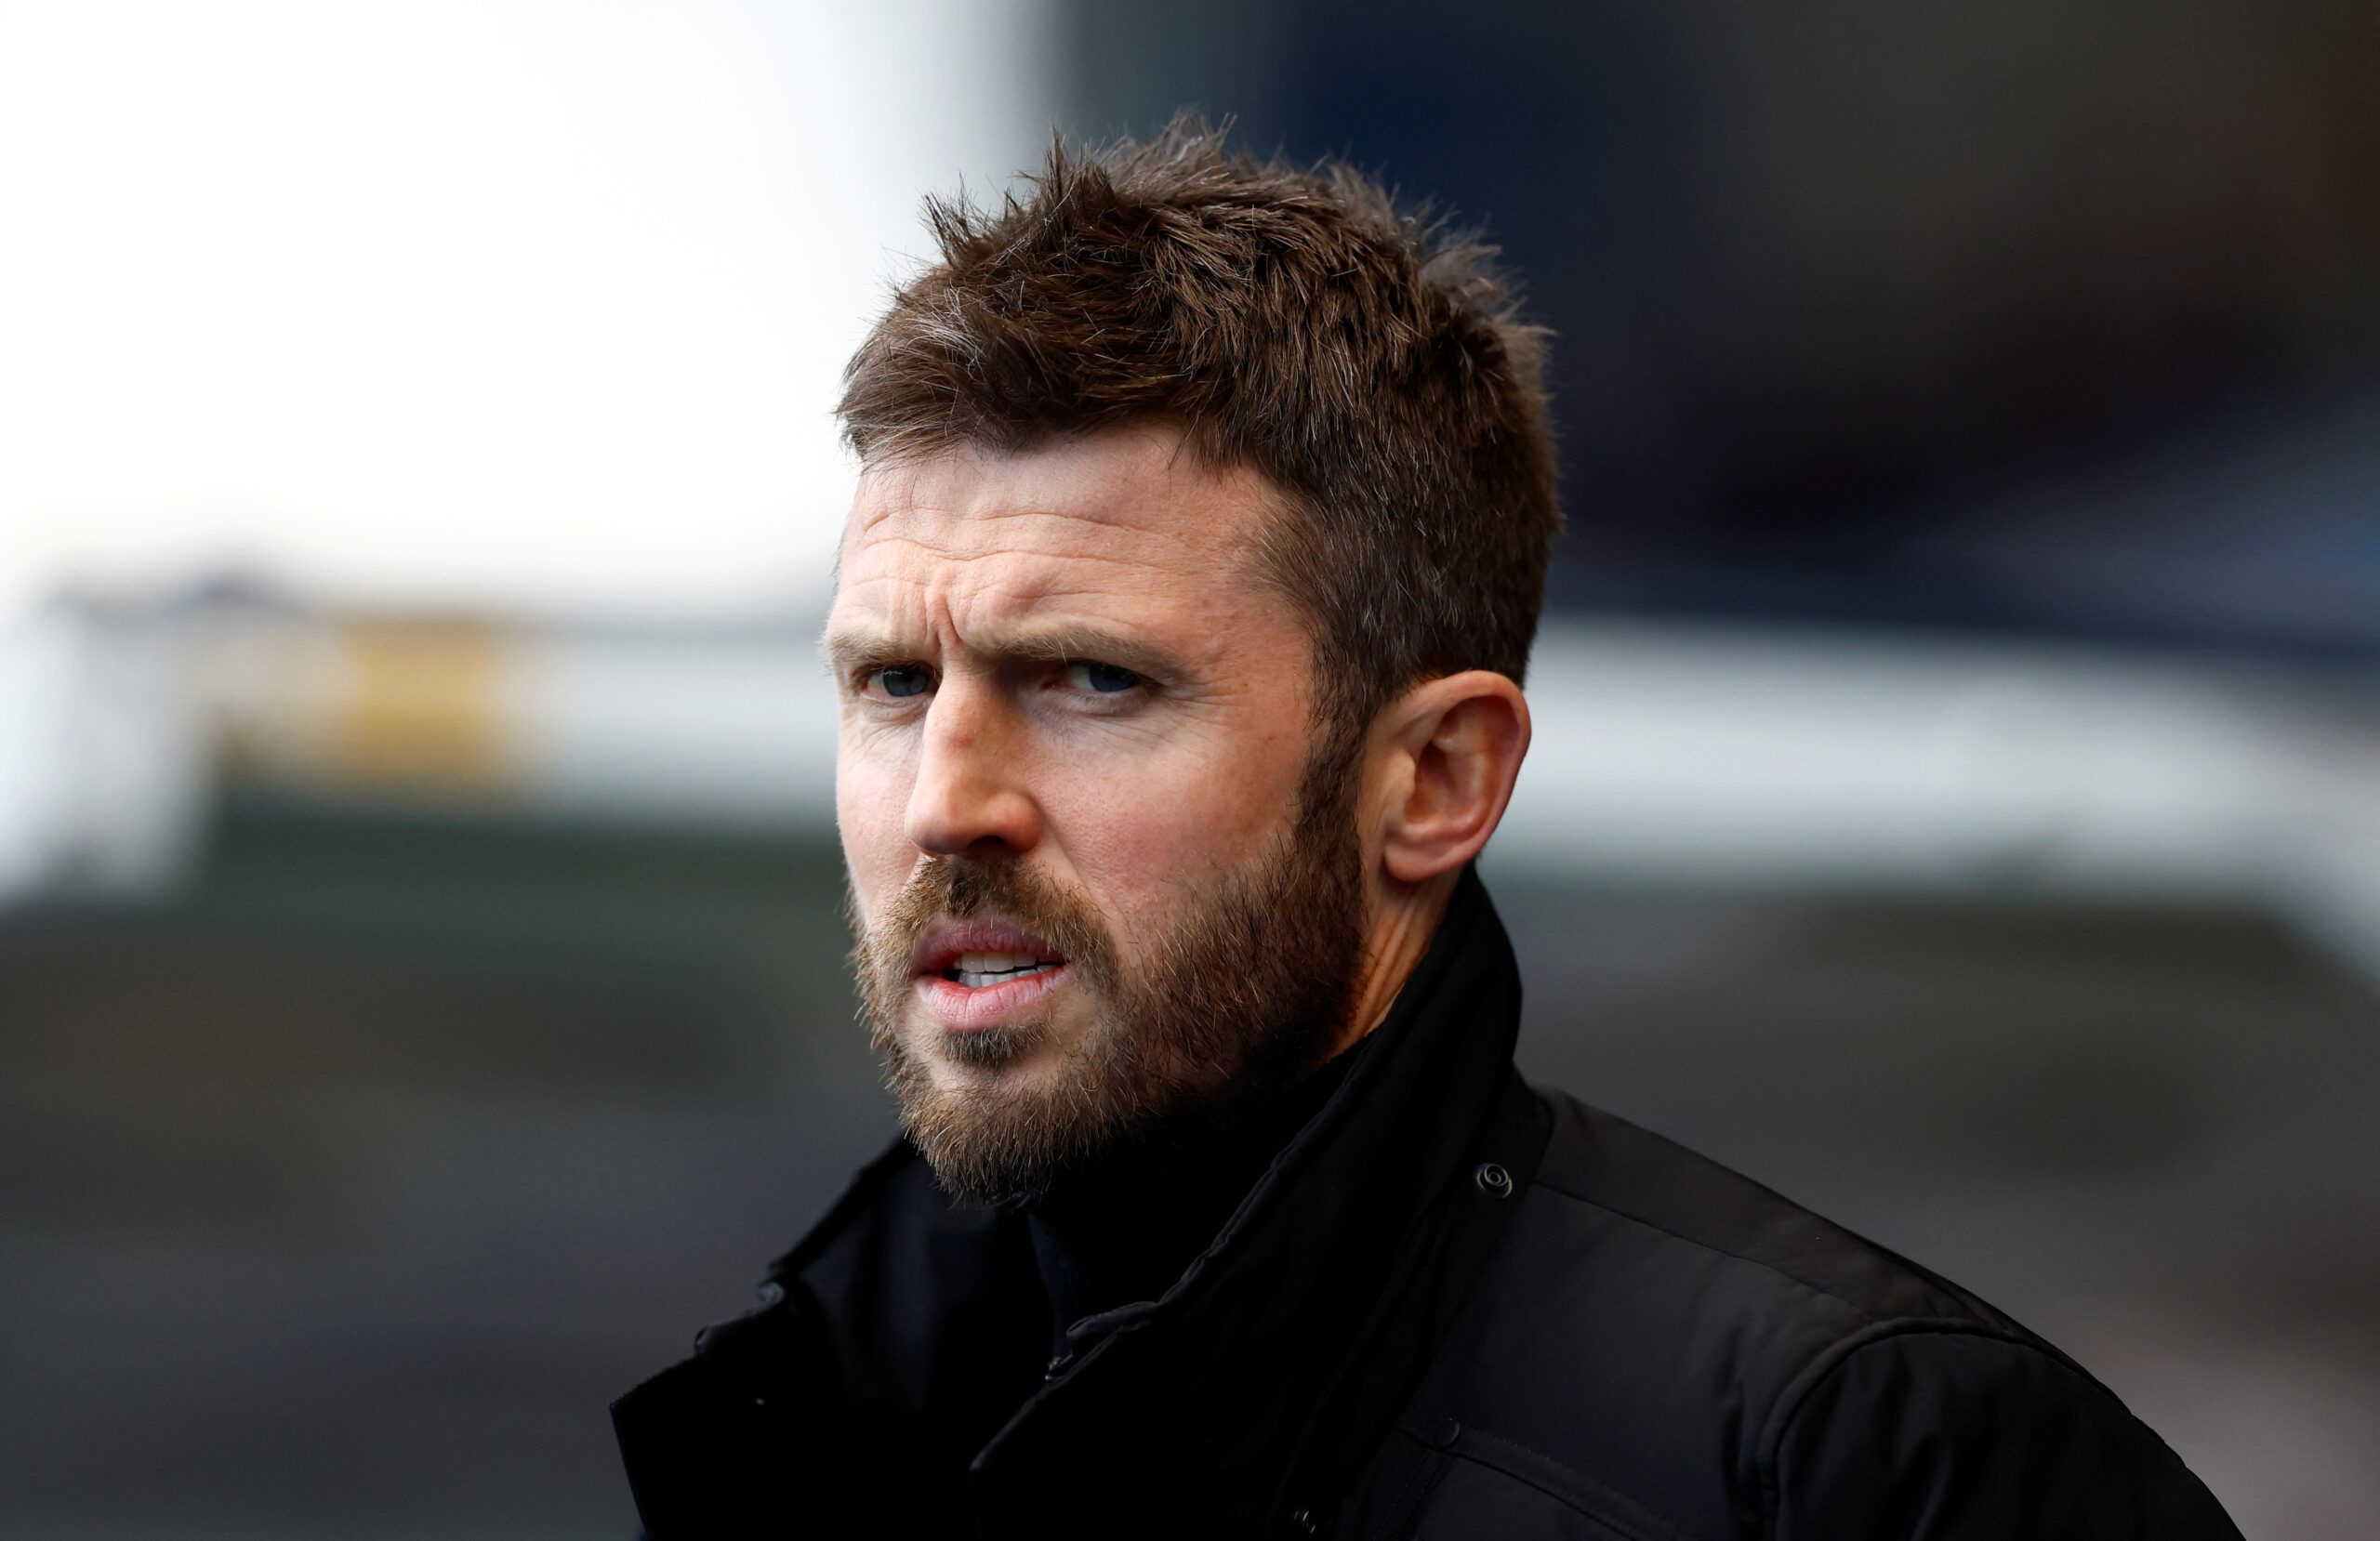 Soccer Football - Championship - Birmingham City v Middlesbrough - St Andrew's, Birmingham, Britain - January 2, 2023 Middlesbrough manager Michael Carrick Action Images/Andrew Boyers  EDITORIAL USE ONLY. No use with unauthorized audio, video, data, fixture lists, club/league logos or 